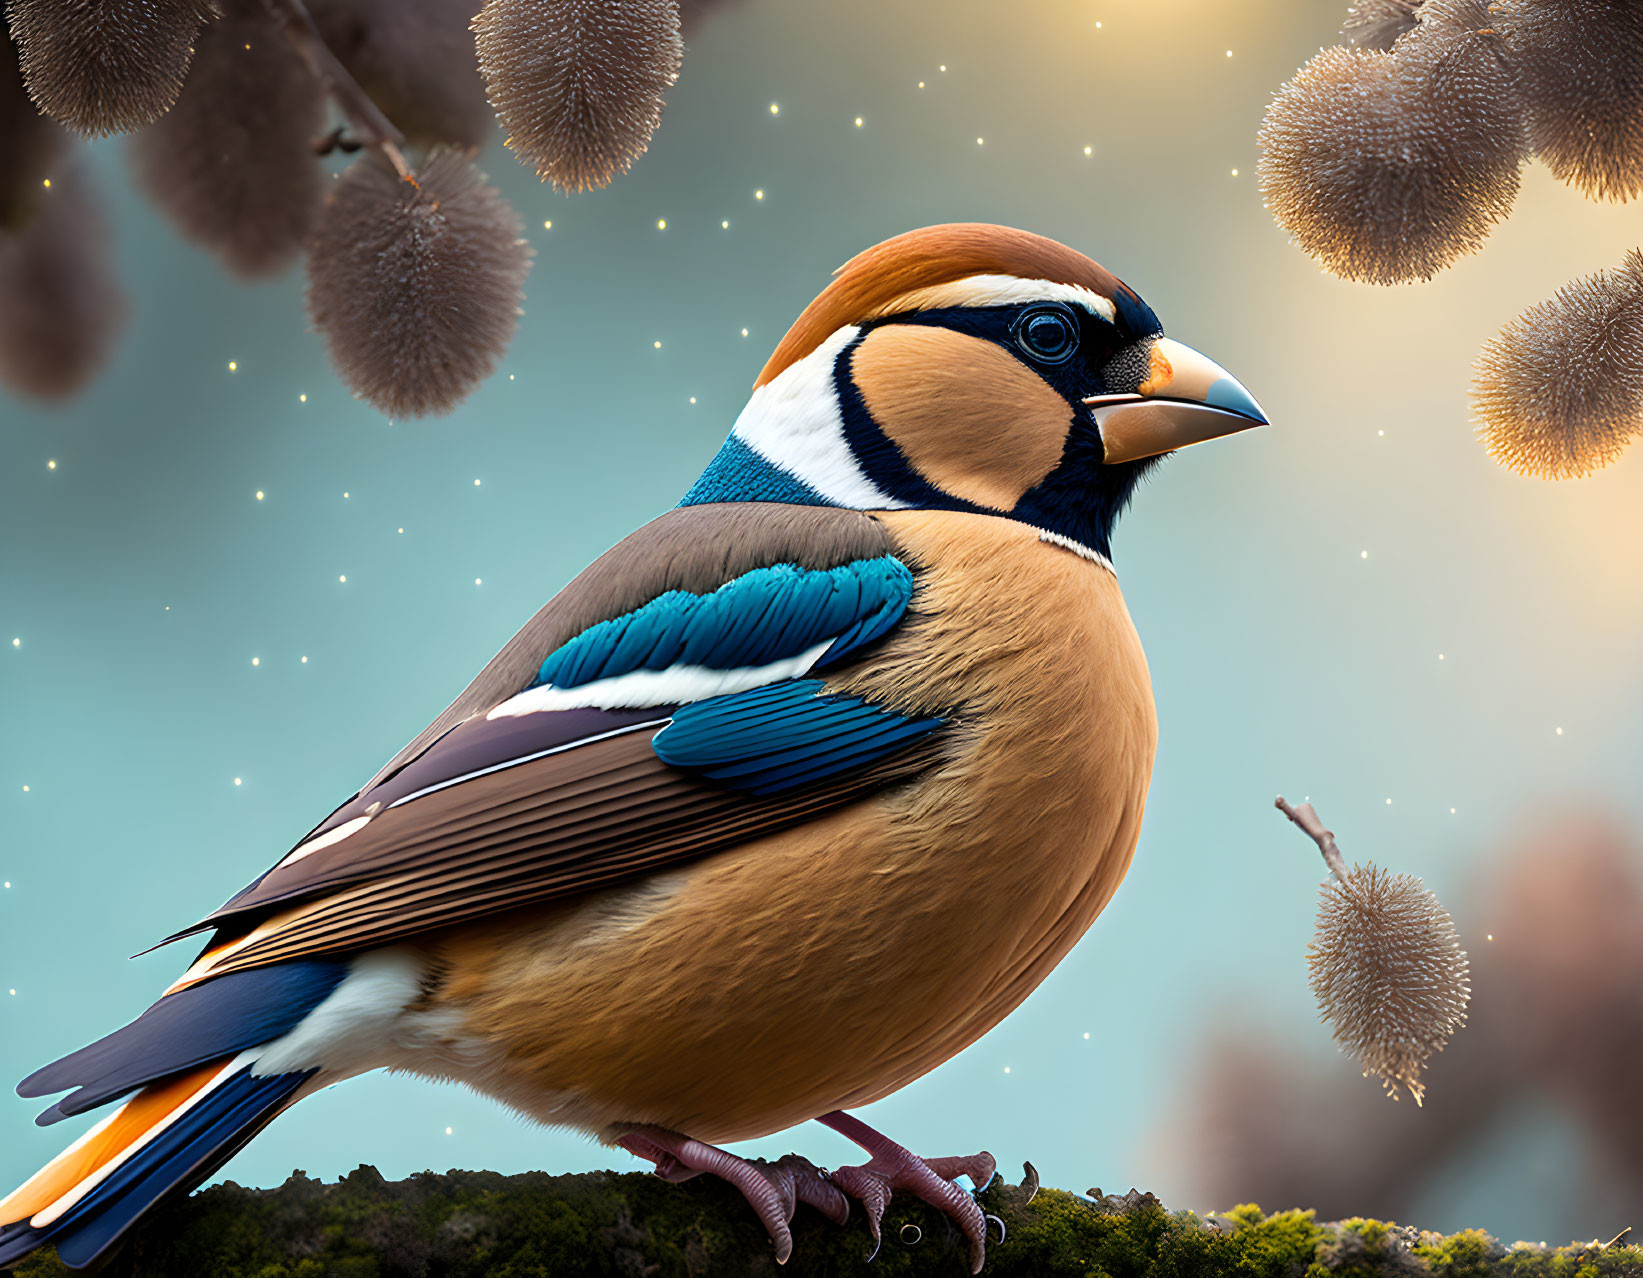 Colorful Bird with Orange, Blue, and Brown Feathers Perched in Twilight Scene